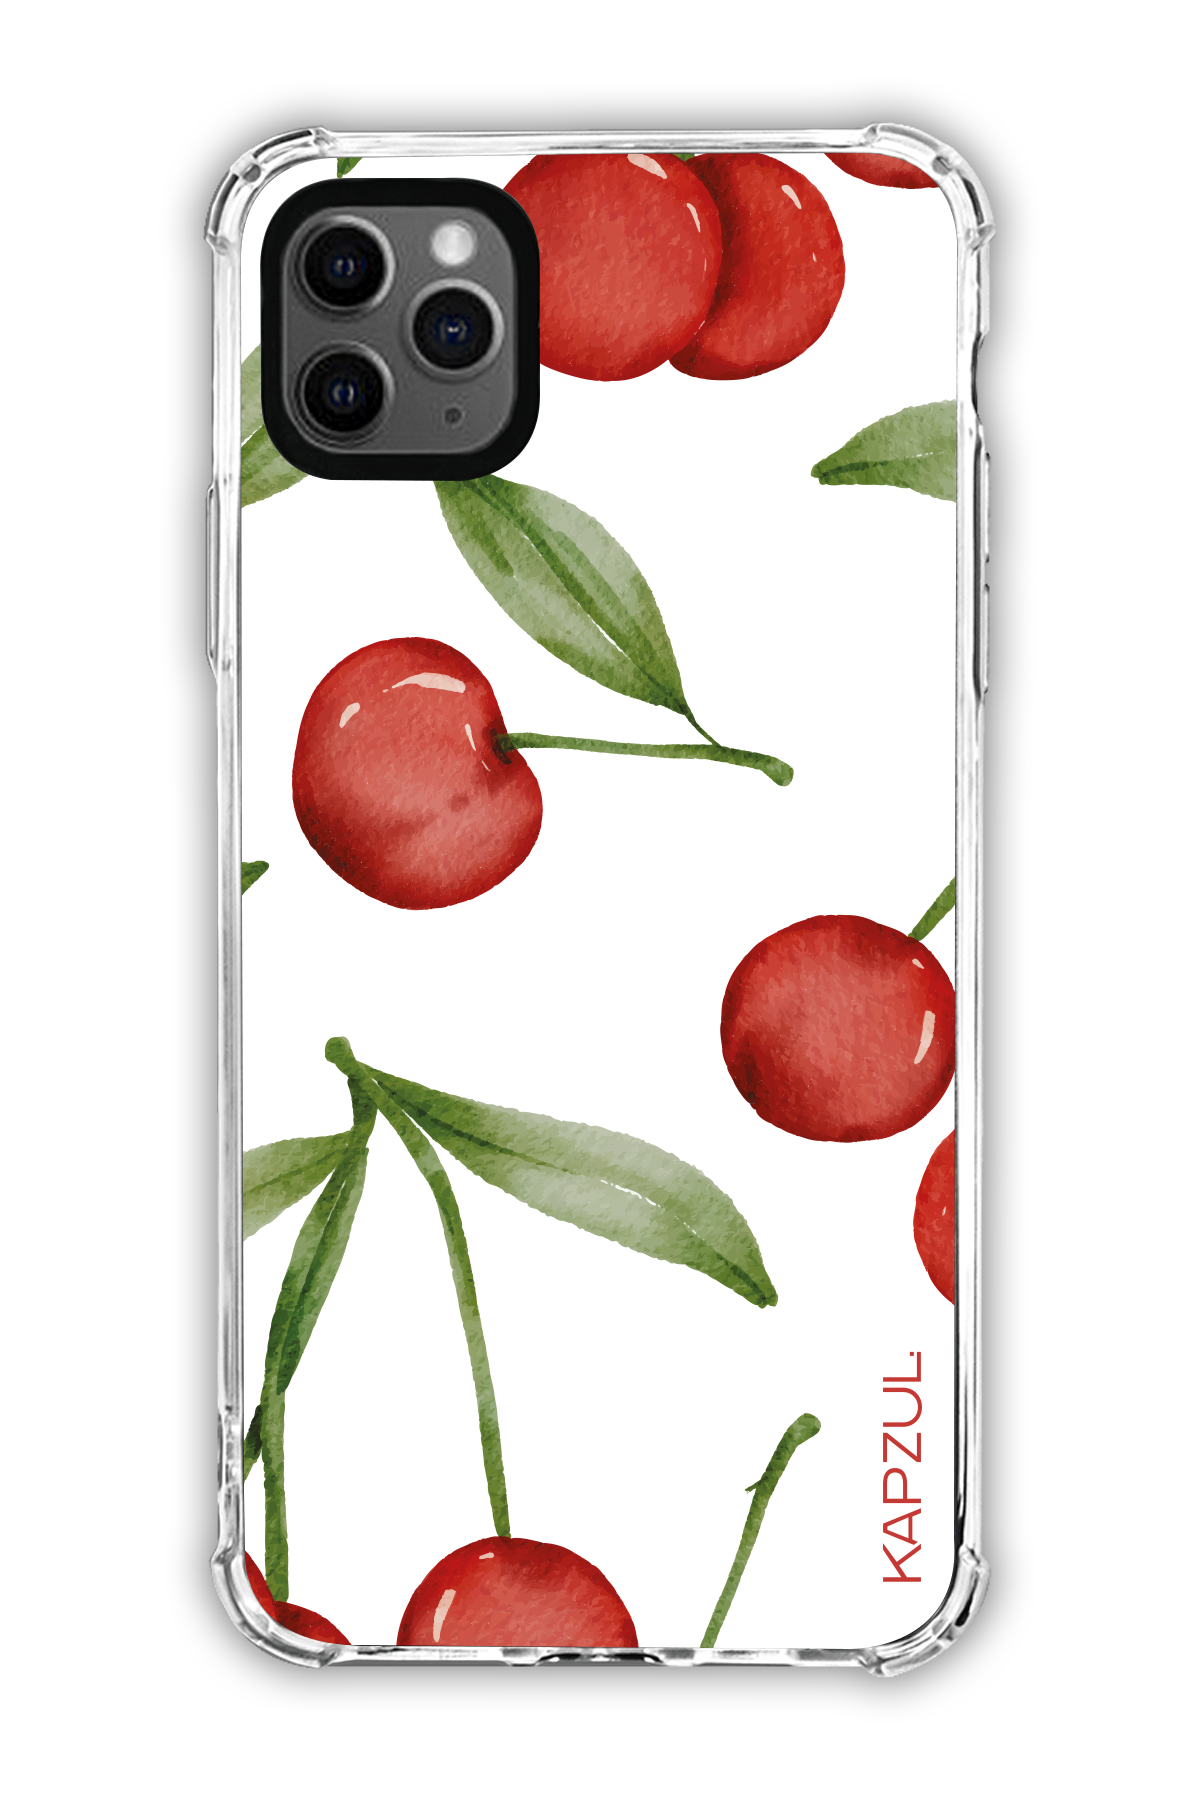 Cherrybomb – Love Letters - iPhone 11 Pro Max - Transparent Case